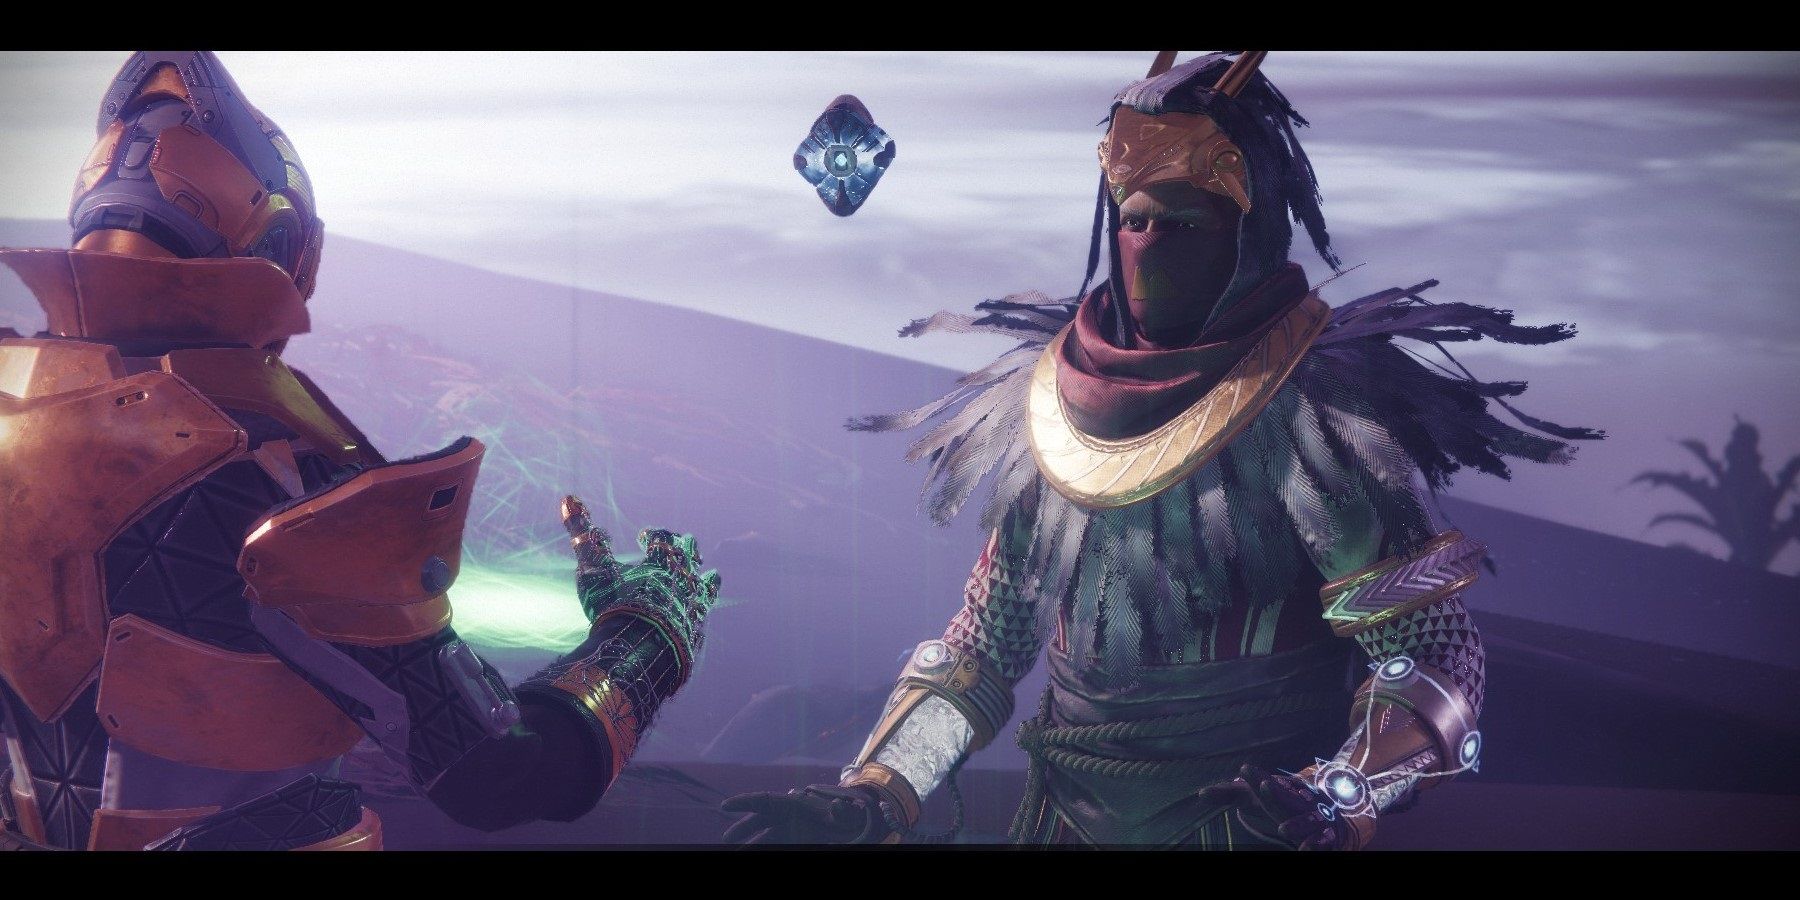 Osiris teaching the guardian how to use Strand in Destiny 2